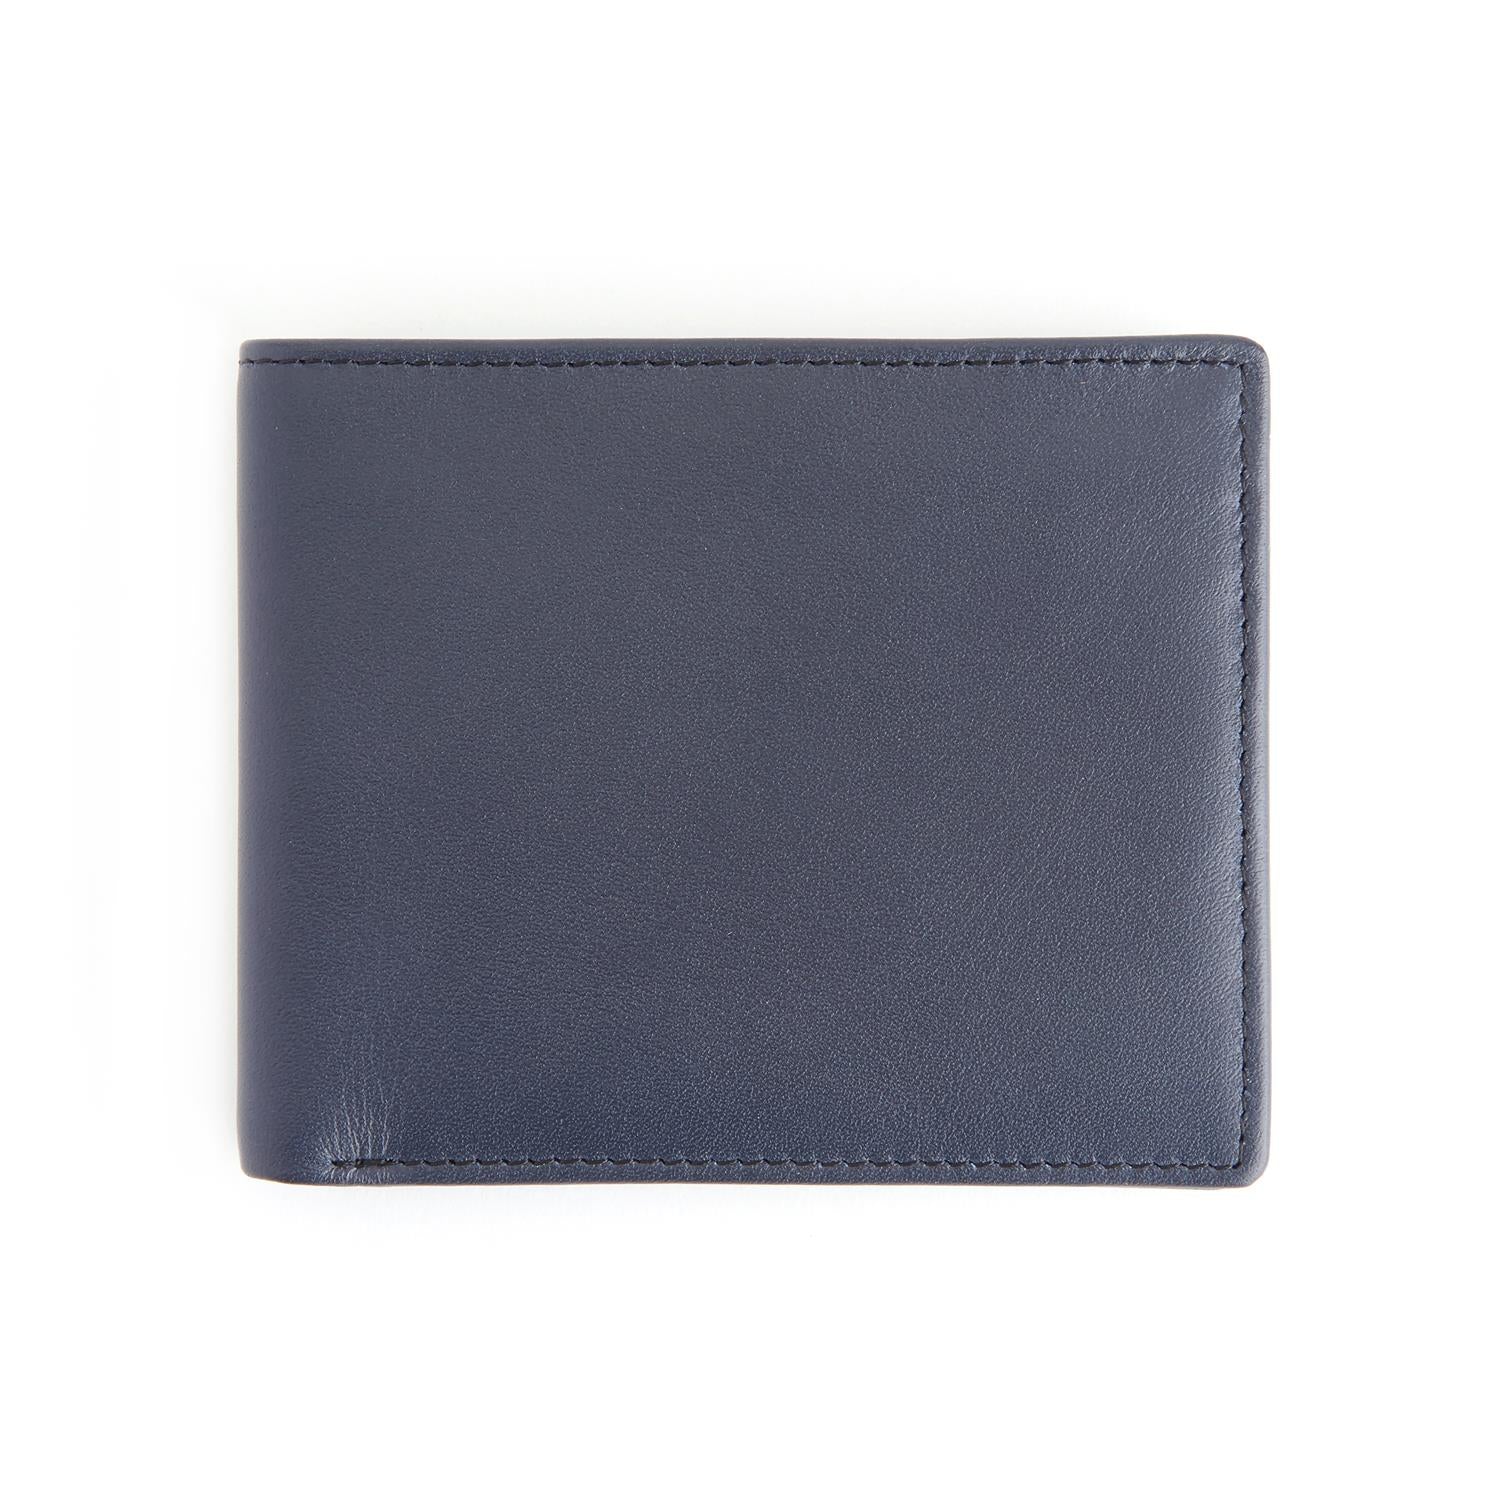 Royce New York Rfid Blocking Trifold Wallet In Navy Blue With Black Interior